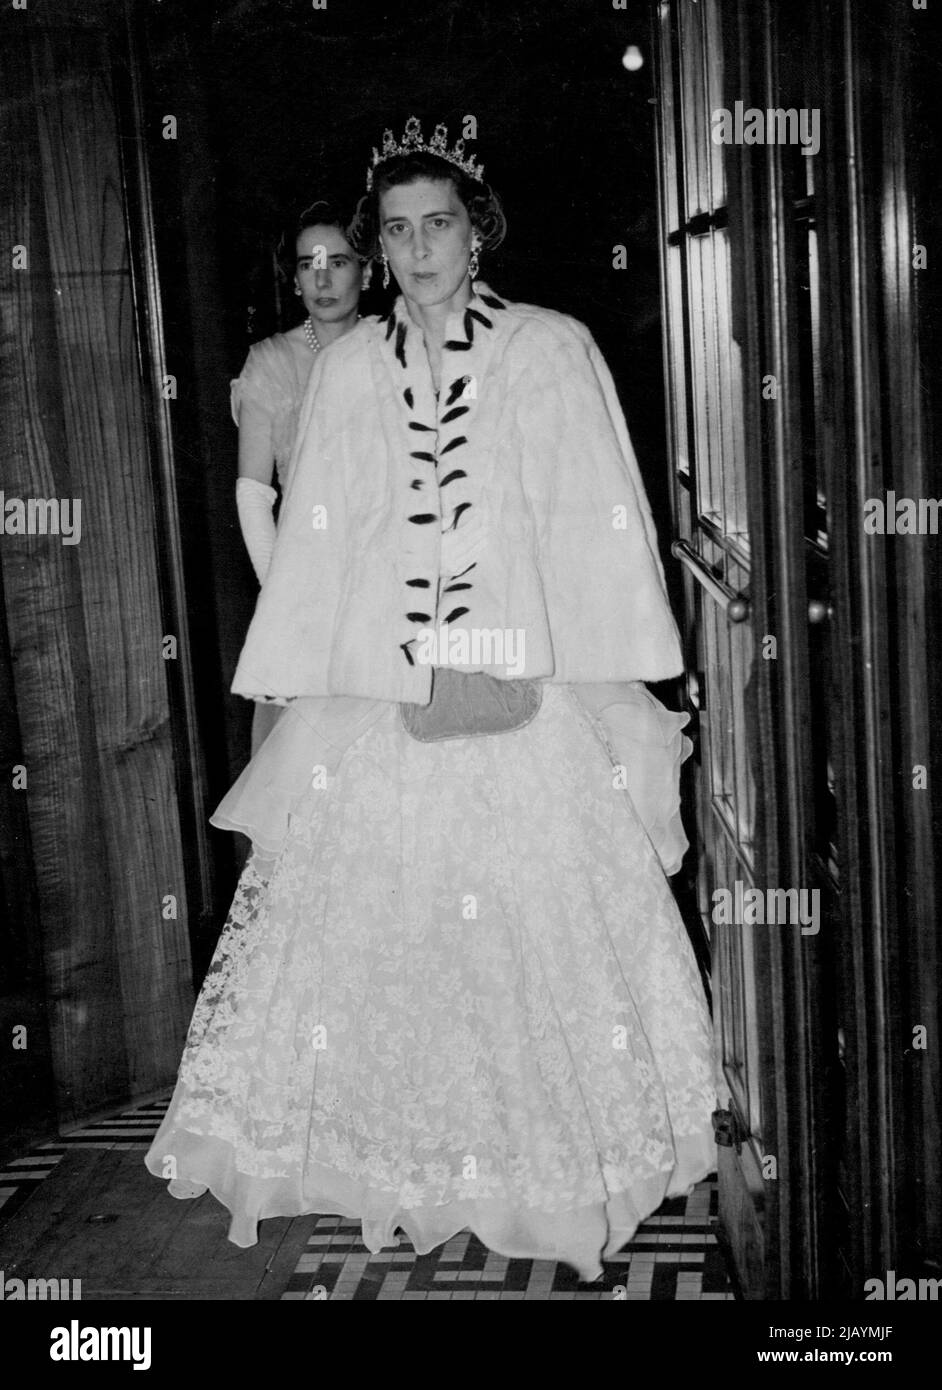 Duchess at Business Women's Reception - The Duchess of Kent arrives at a reception for the International Federation of Business and Professional Women at the ***** Gallery. Exquisite Gown of Embroidered organza with draped panniers on the hips, was worn by the Duchess of Kent when she arrived at a reception for the International Federation of Business and Professional Women in London. The Duchess cape of white ermine was decorated with ermine tails. July 31, 1950. (Photo by Daily Mail Contract Picture) Stock Photo